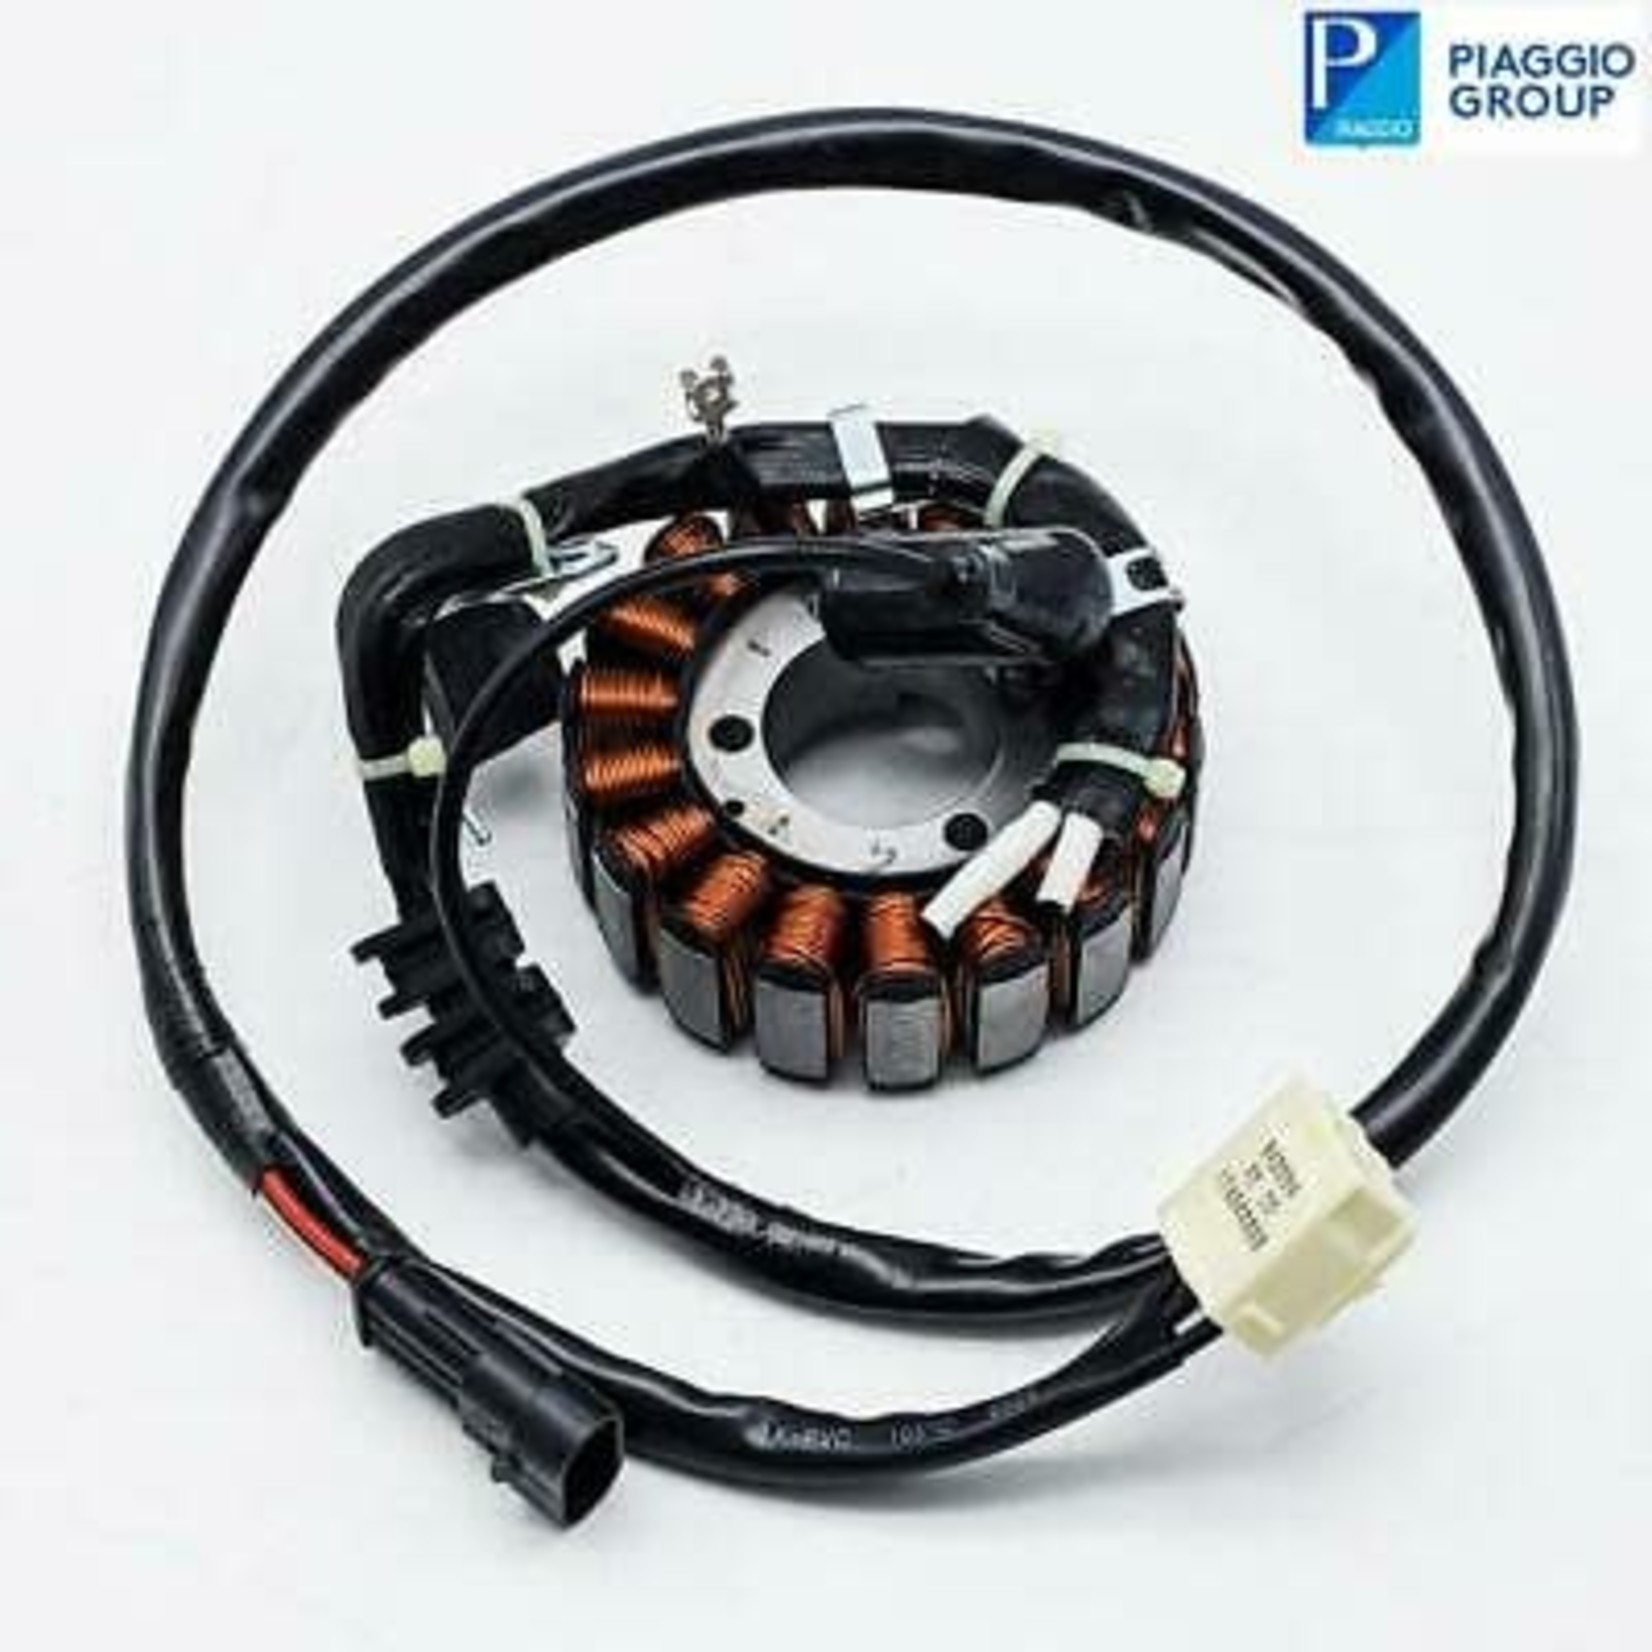 Parts Stator, 300 HPE